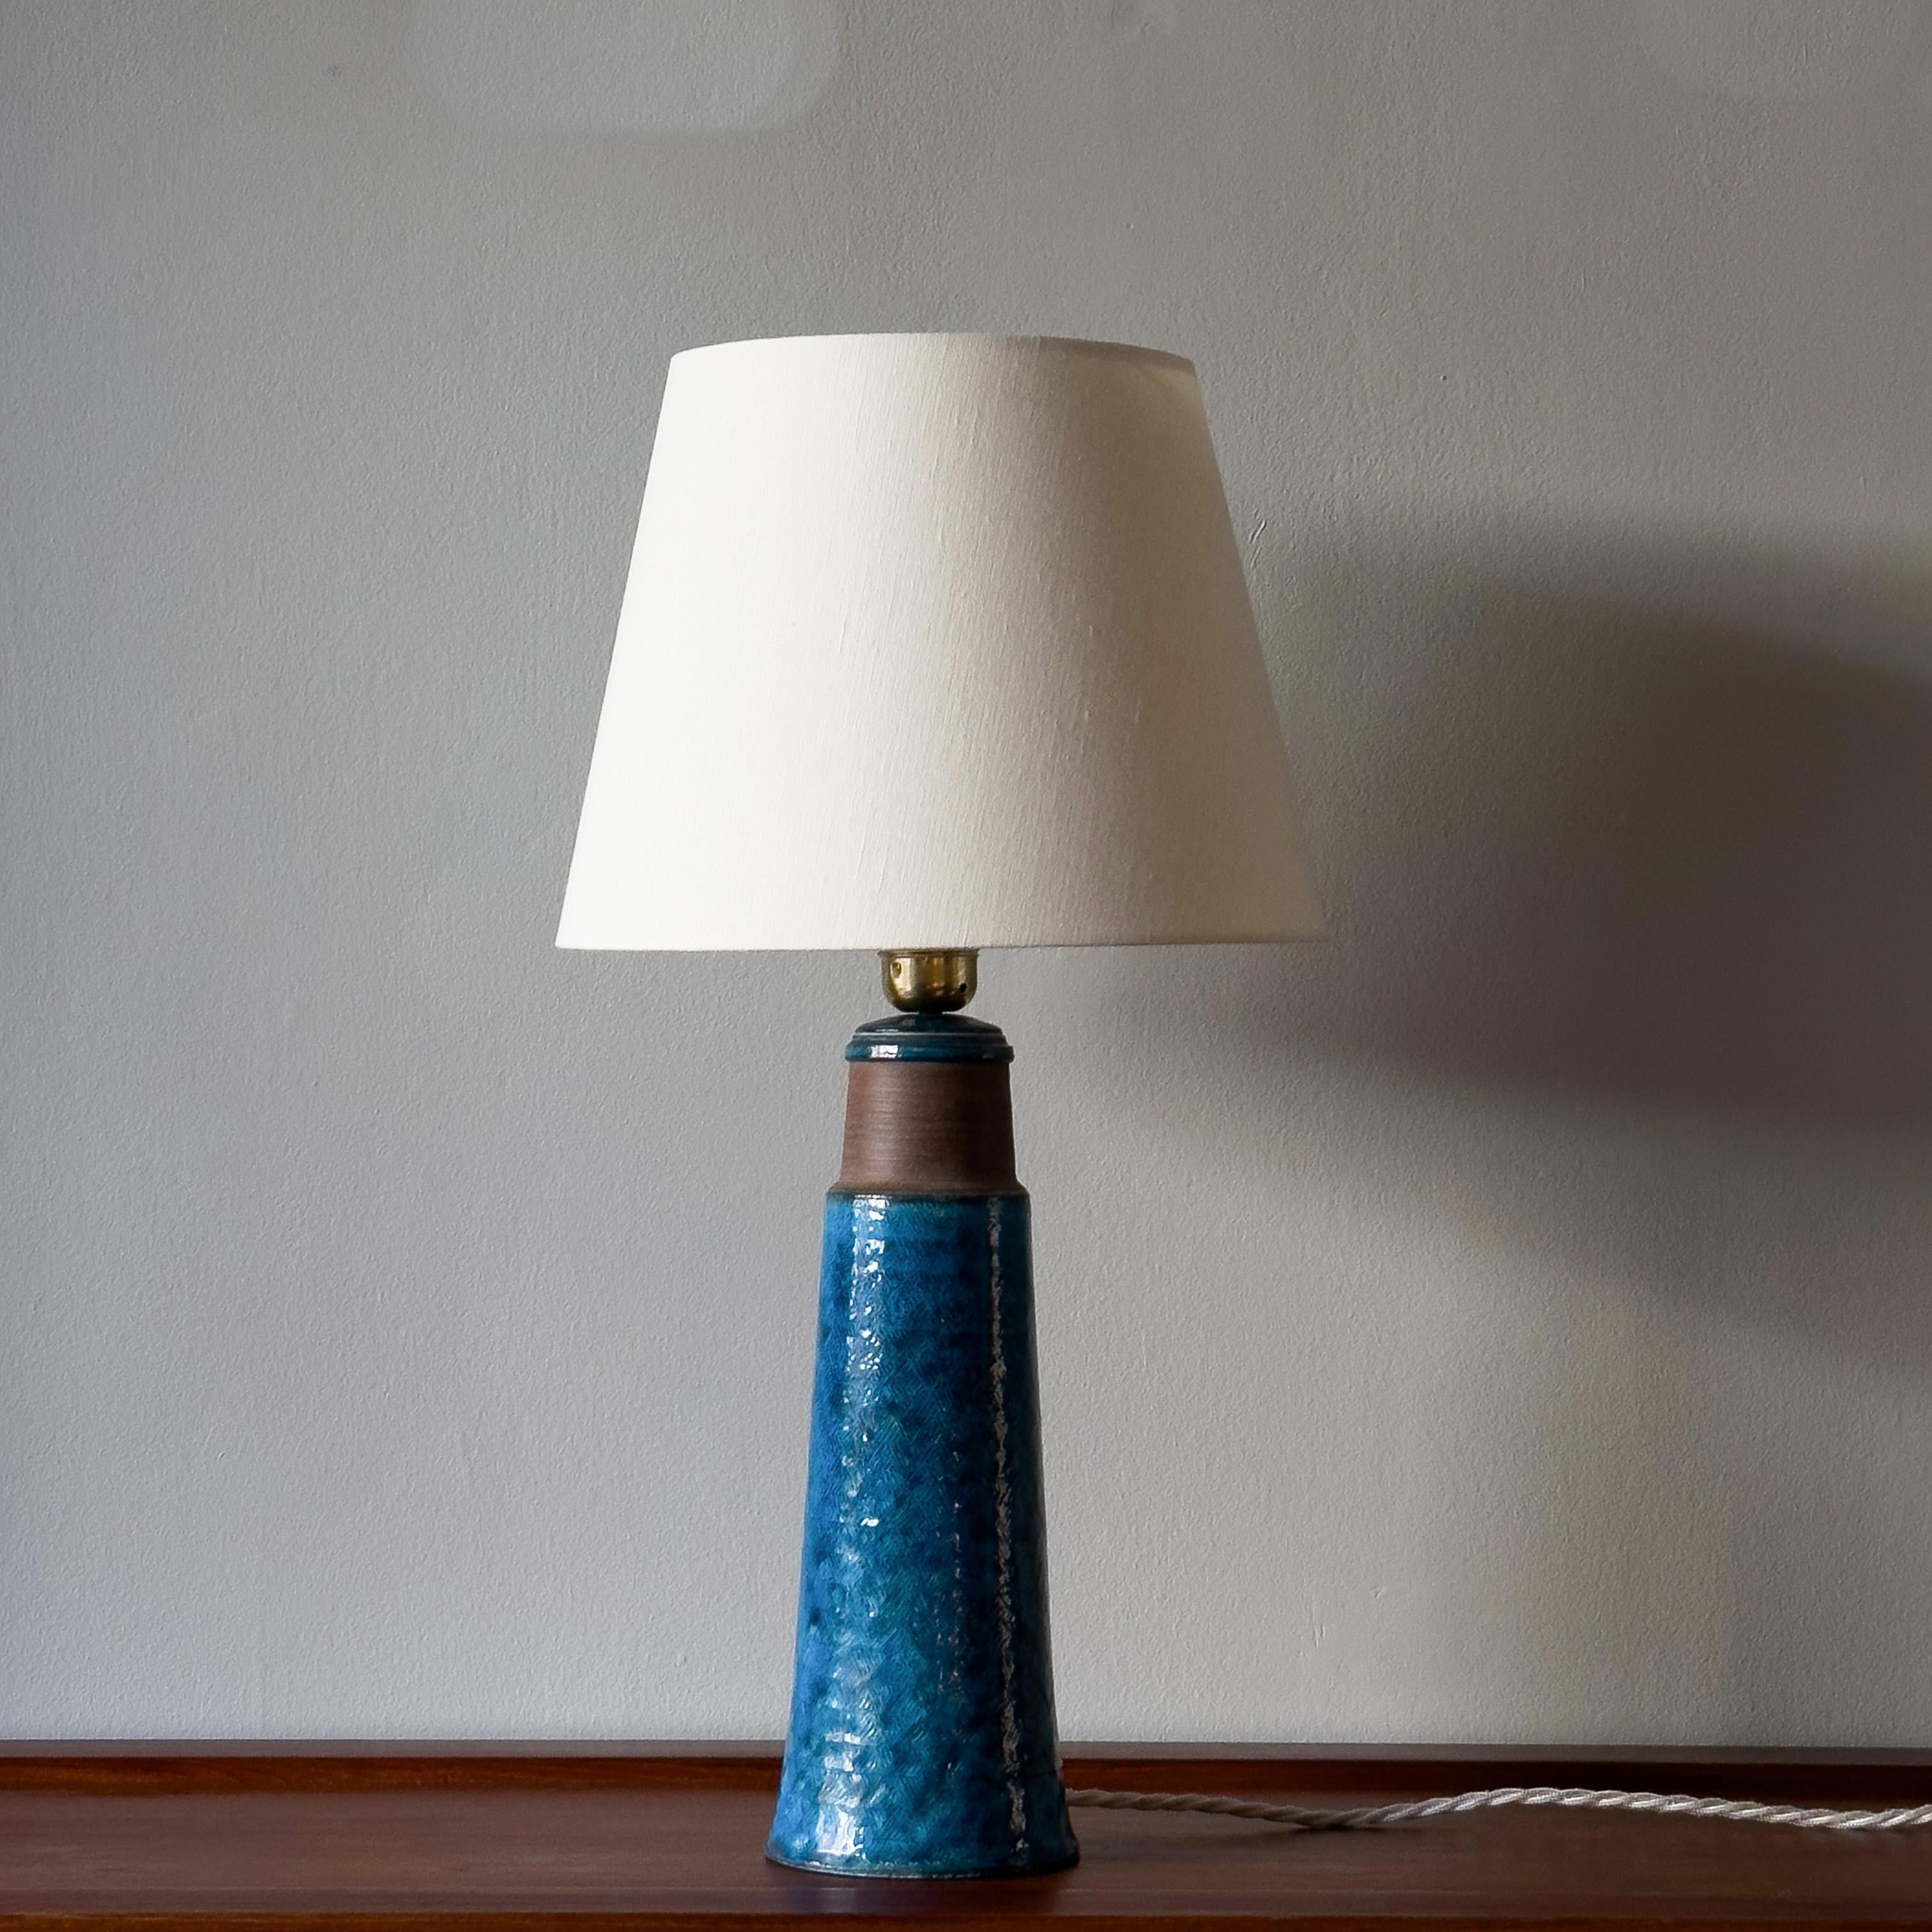 A stoneware table lamp designed by Nils Kähler for Herman A. Kähler Keramik, the family workshop founded by his great grandfather in 1839 and which he, 